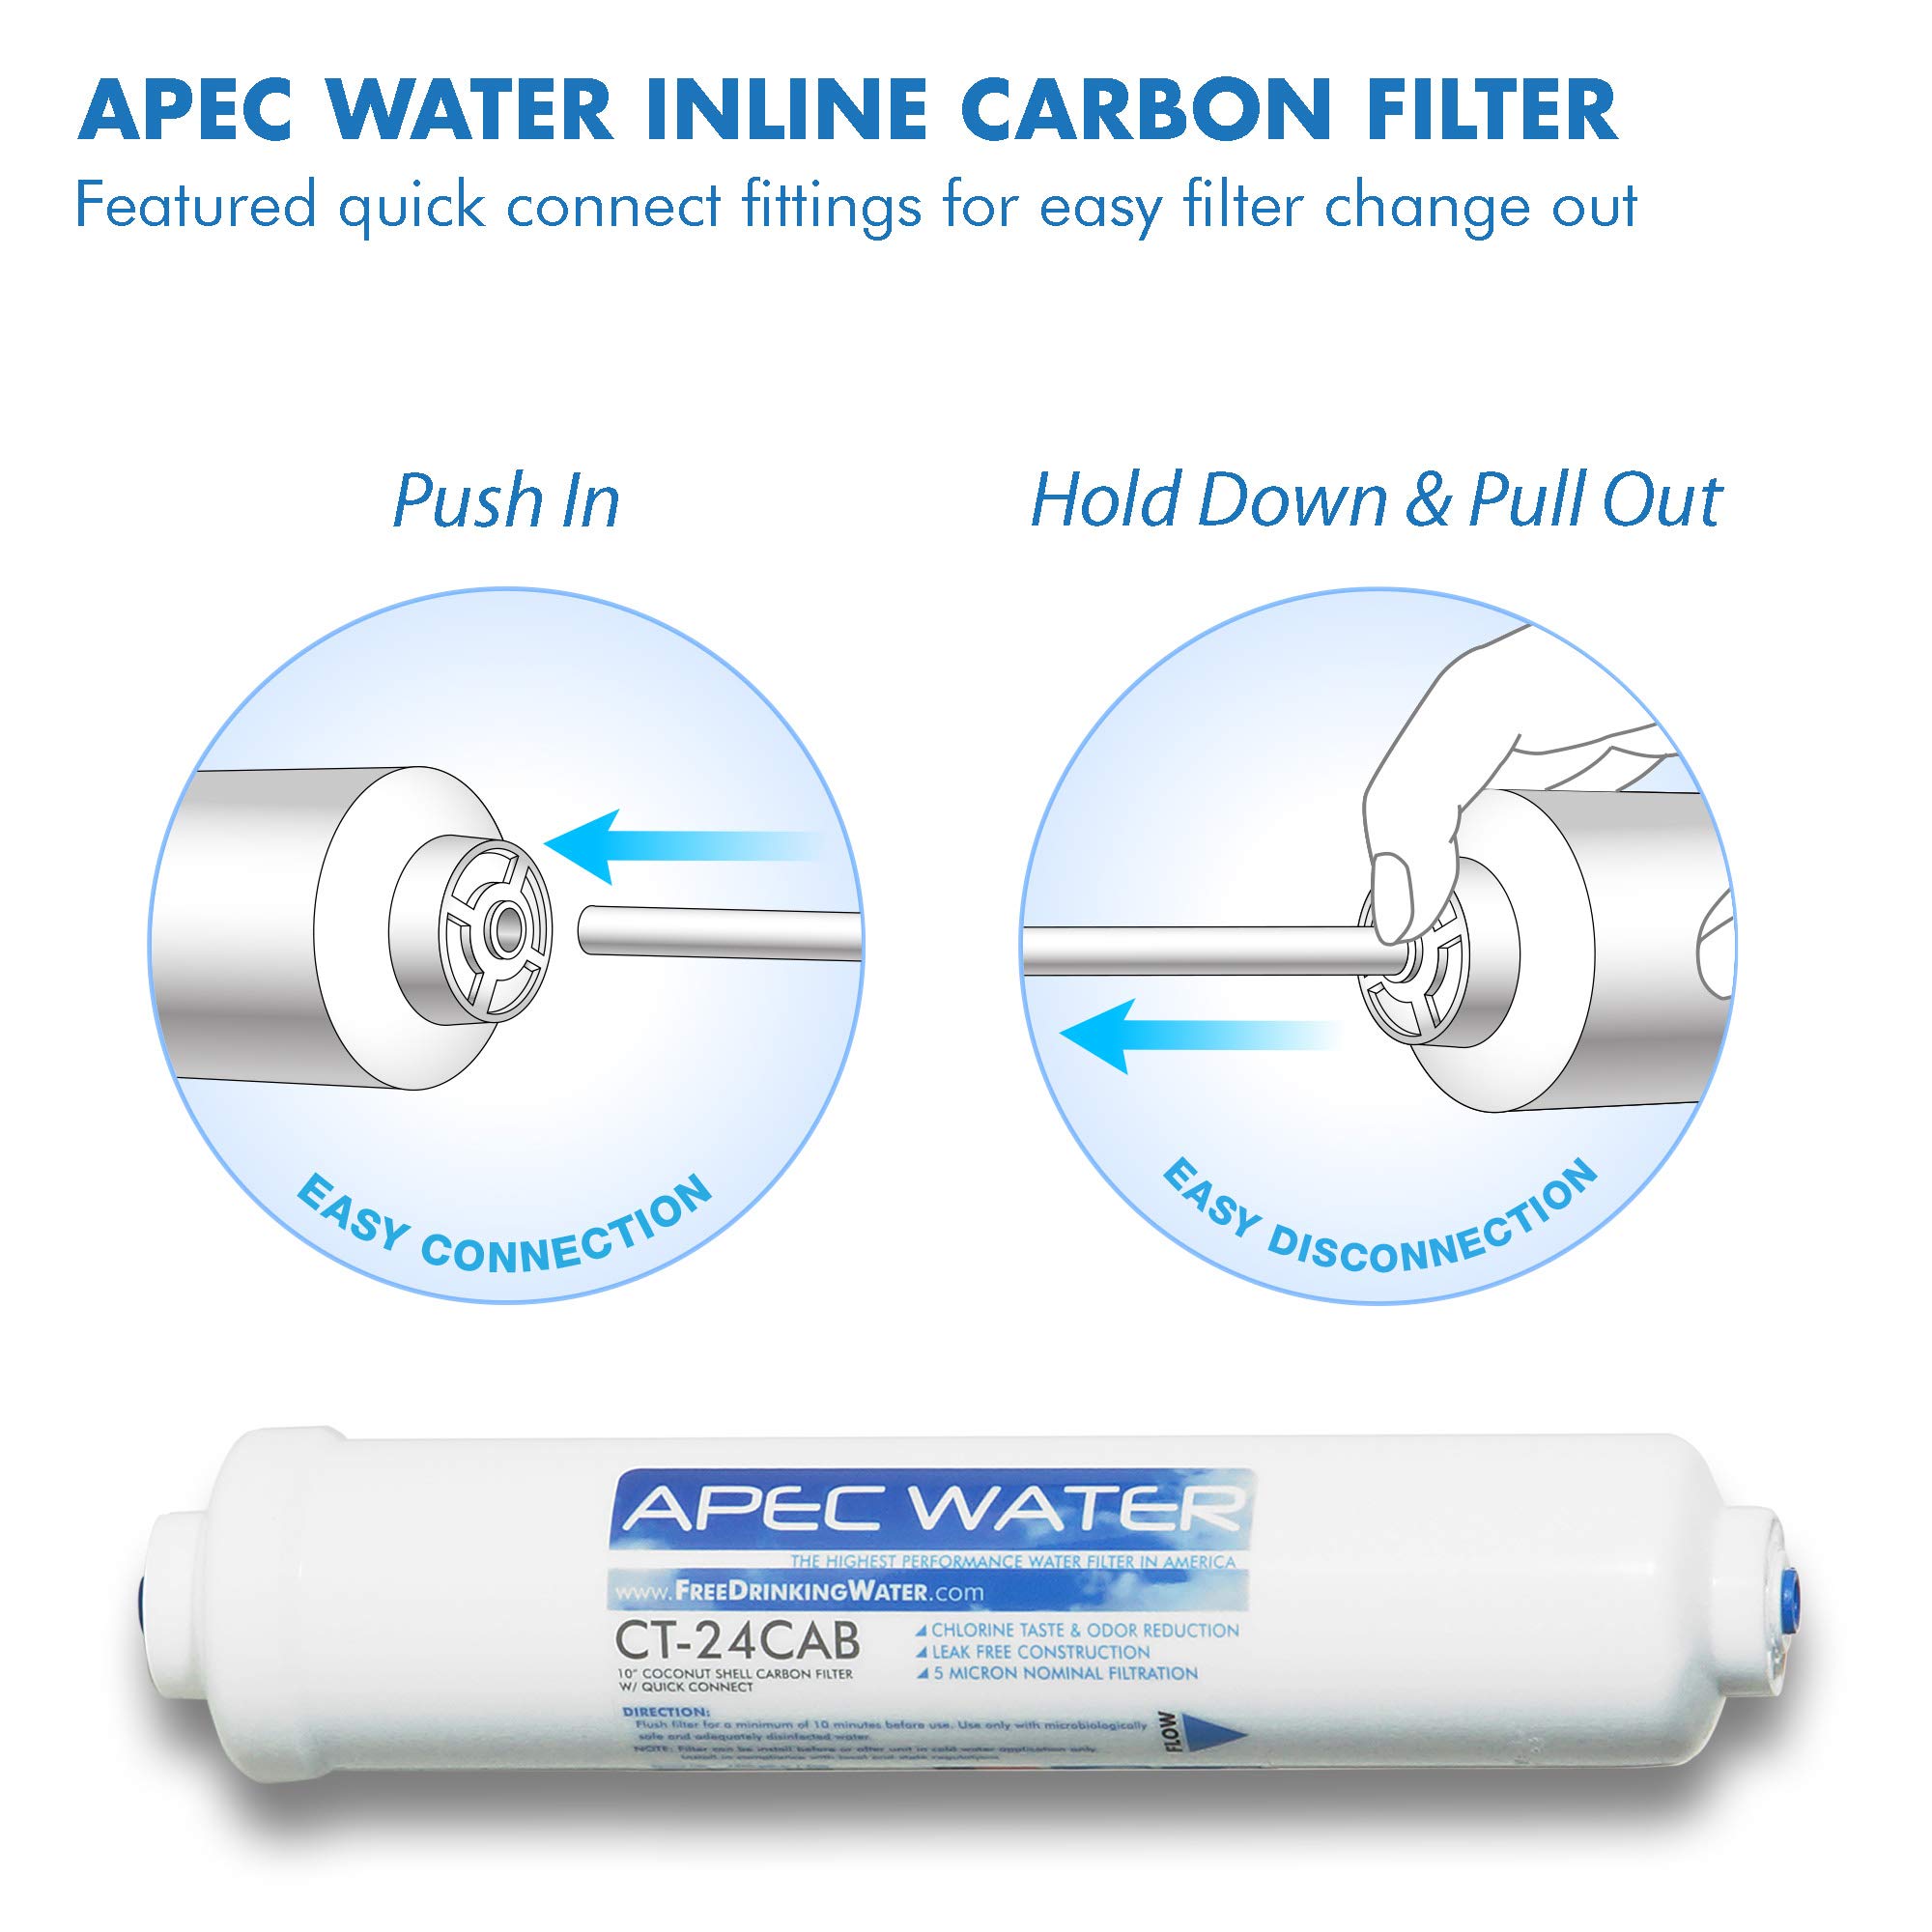 APEC Water Systems CT-24CAB US MADE 10"" Inline Carbon Pre-Filter with 1/4"" Quick Connect For ULTIMATE Series Countertop Reverse Osmosis Water Filter System"